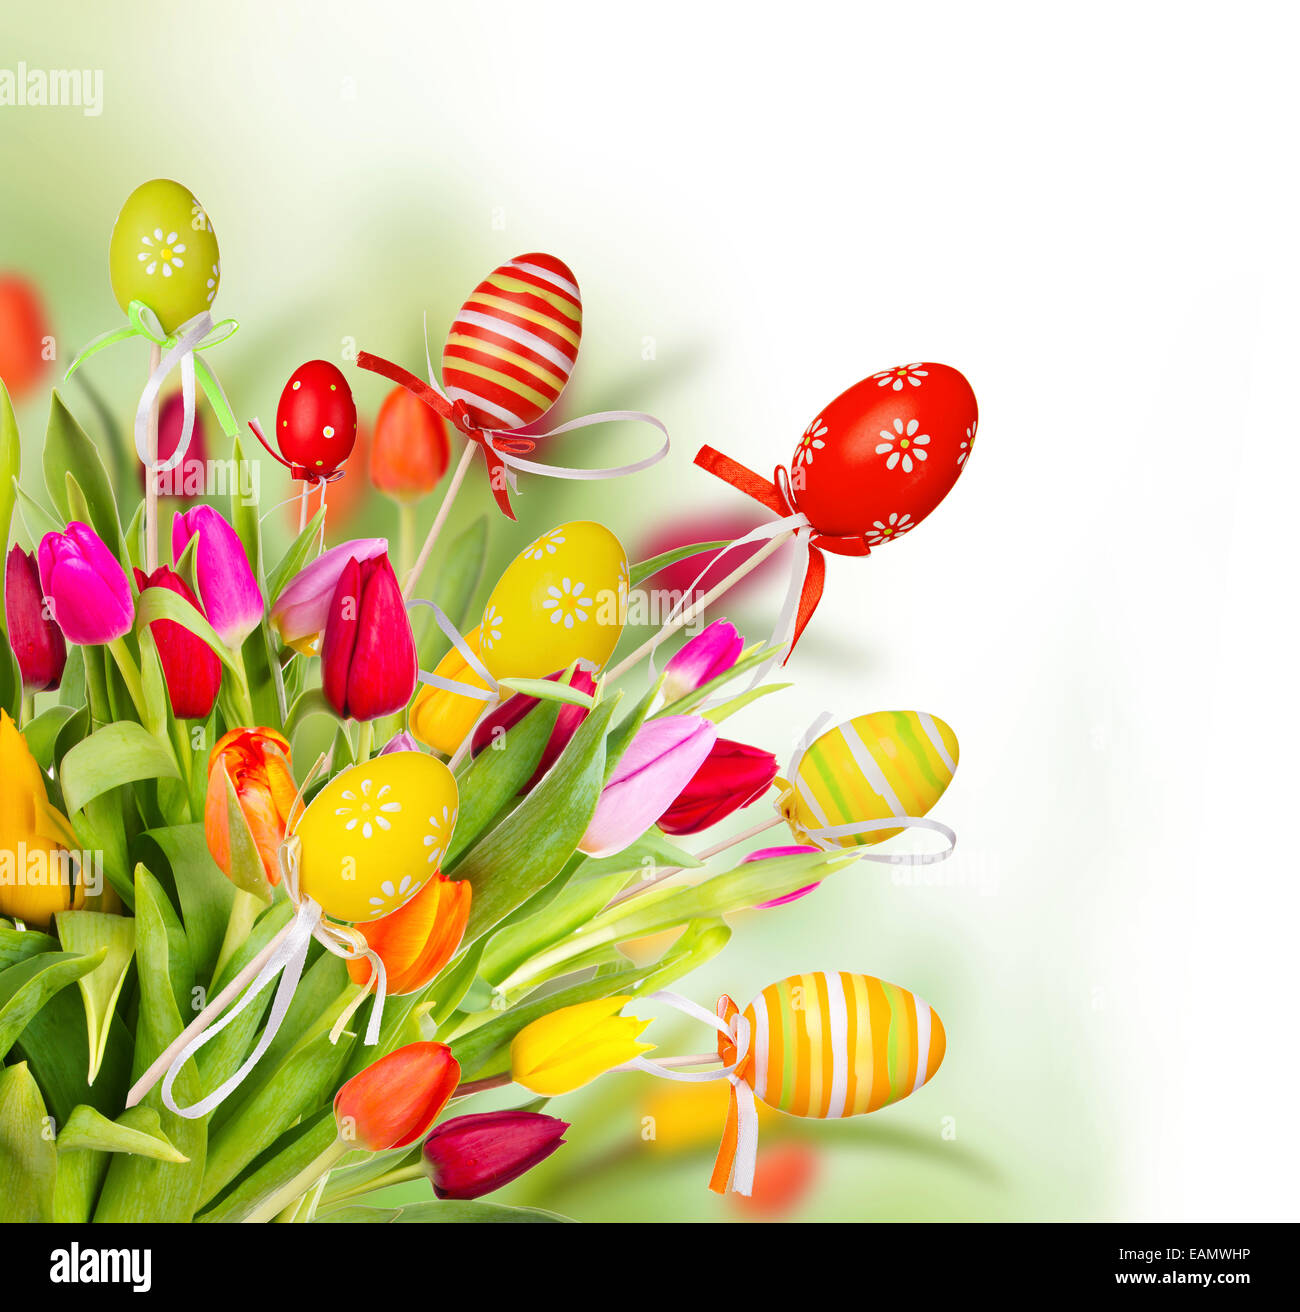 Beautiful spring flowers with butterflies Stock Photo